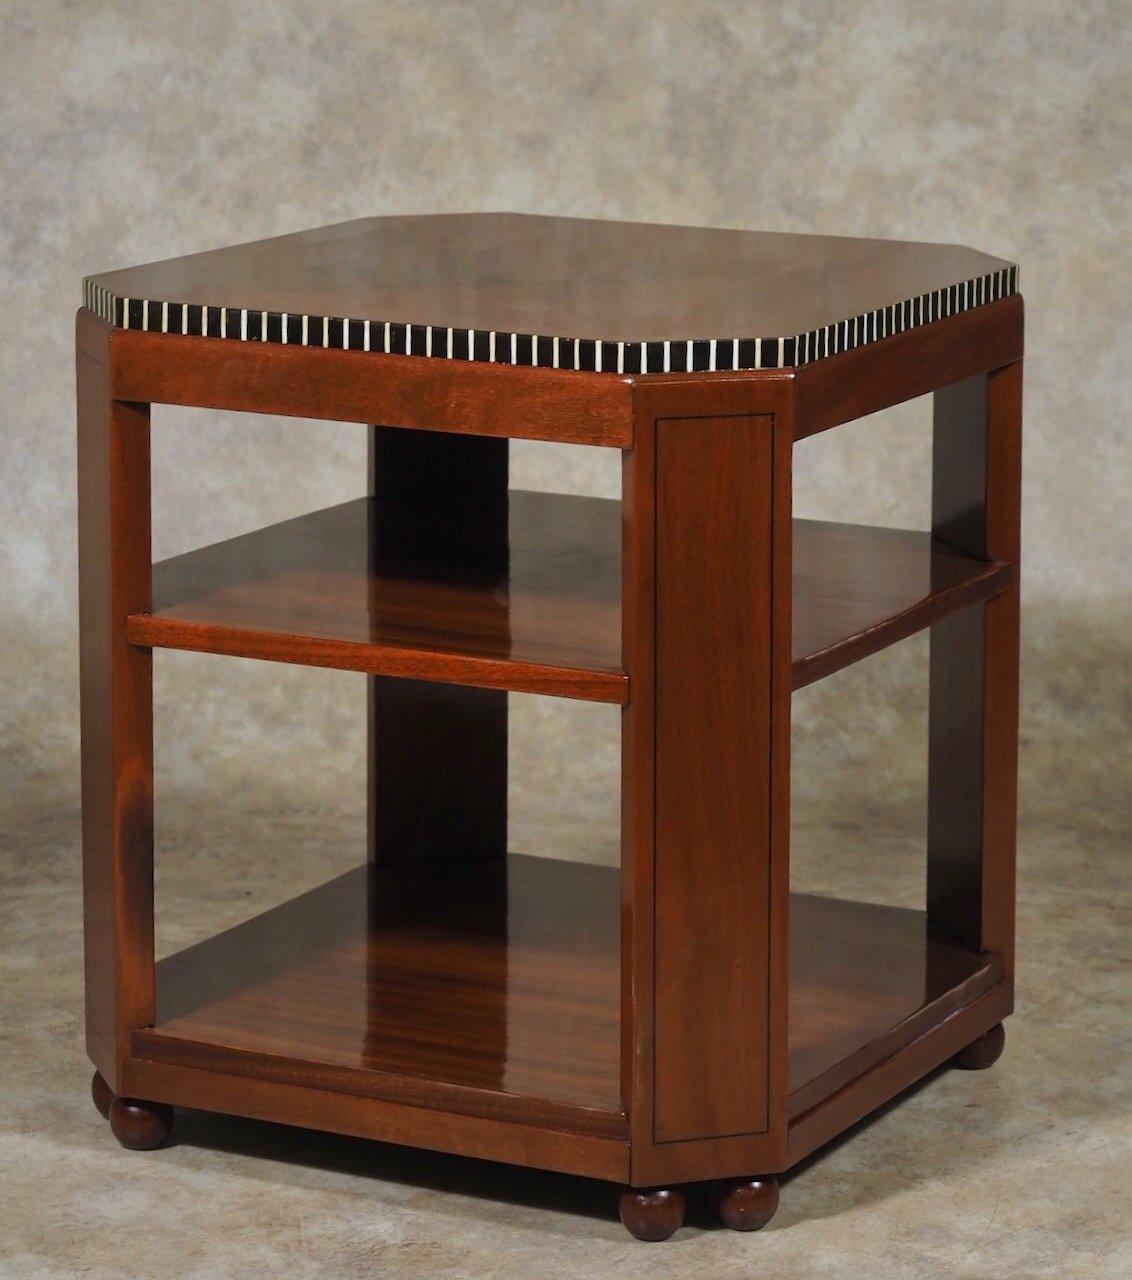 French Modernist Art Deco three-tiered side/end/drinks table by Paul Follot, circa 1926, in mahogany and ebony, with vertical inlays. 20” square x 22” high.

PAUL FOLLOT
(1877 - 1958)


Paris-born decorative artist and sculptor PAUL FOLLOT